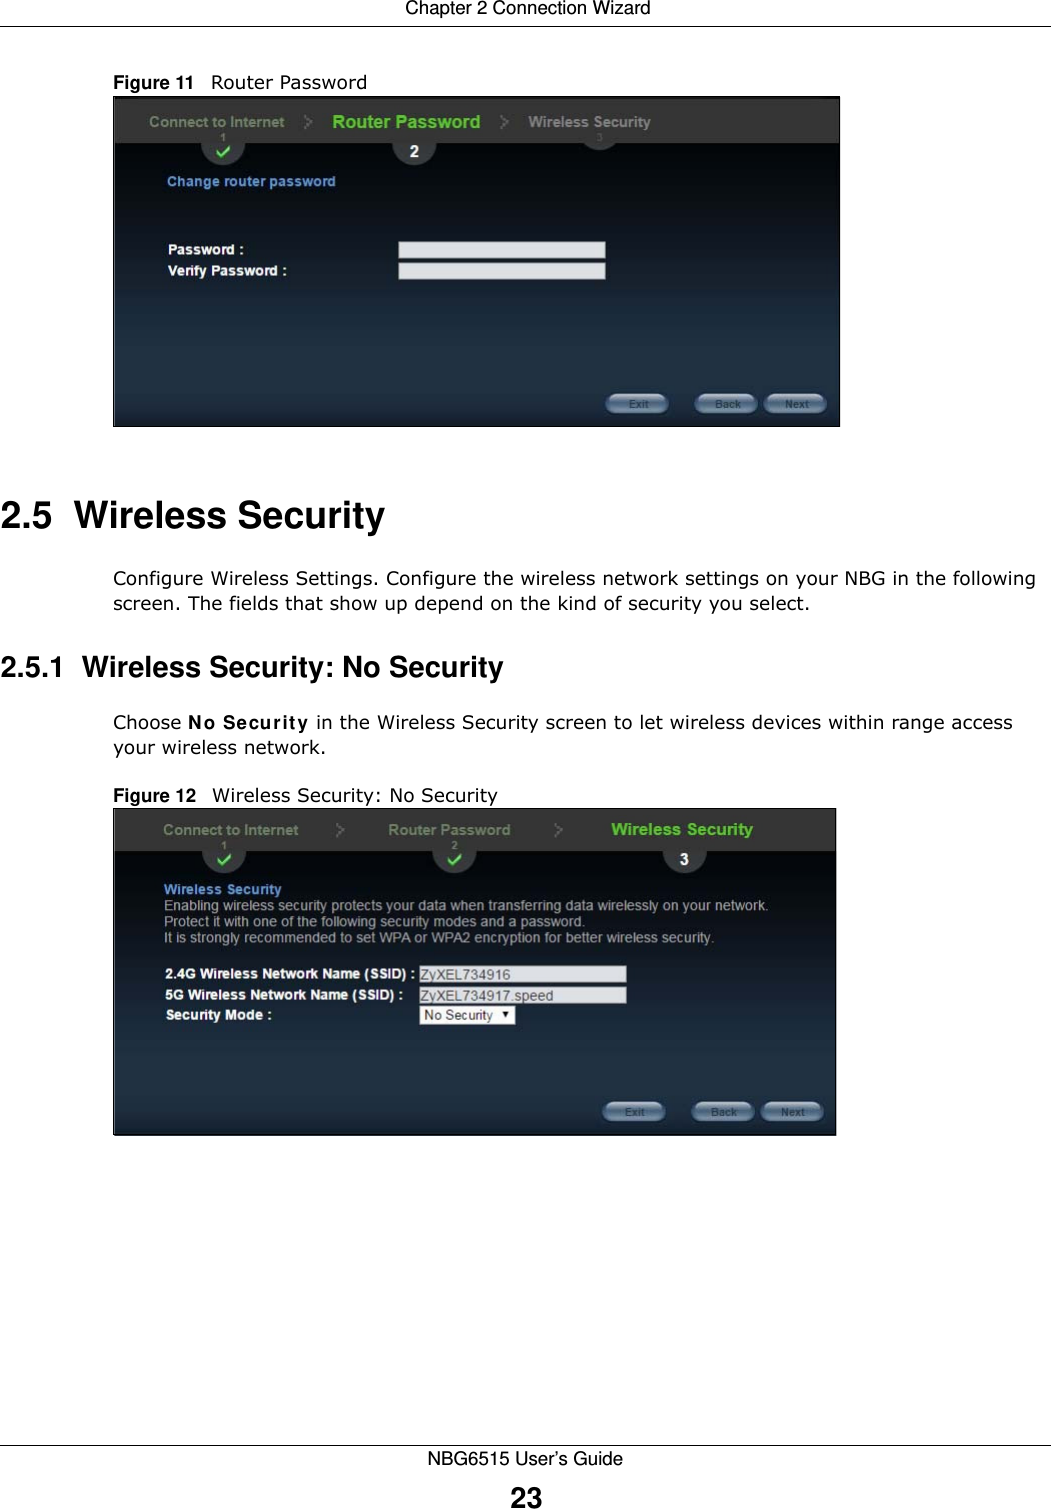  Chapter 2 Connection WizardNBG6515 User’s Guide23Figure 11   Router Password  2.5  Wireless SecurityConfigure Wireless Settings. Configure the wireless network settings on your NBG in the following screen. The fields that show up depend on the kind of security you select.2.5.1  Wireless Security: No SecurityChoose No Security in the Wireless Security screen to let wireless devices within range access your wireless network.Figure 12   Wireless Security: No Security 